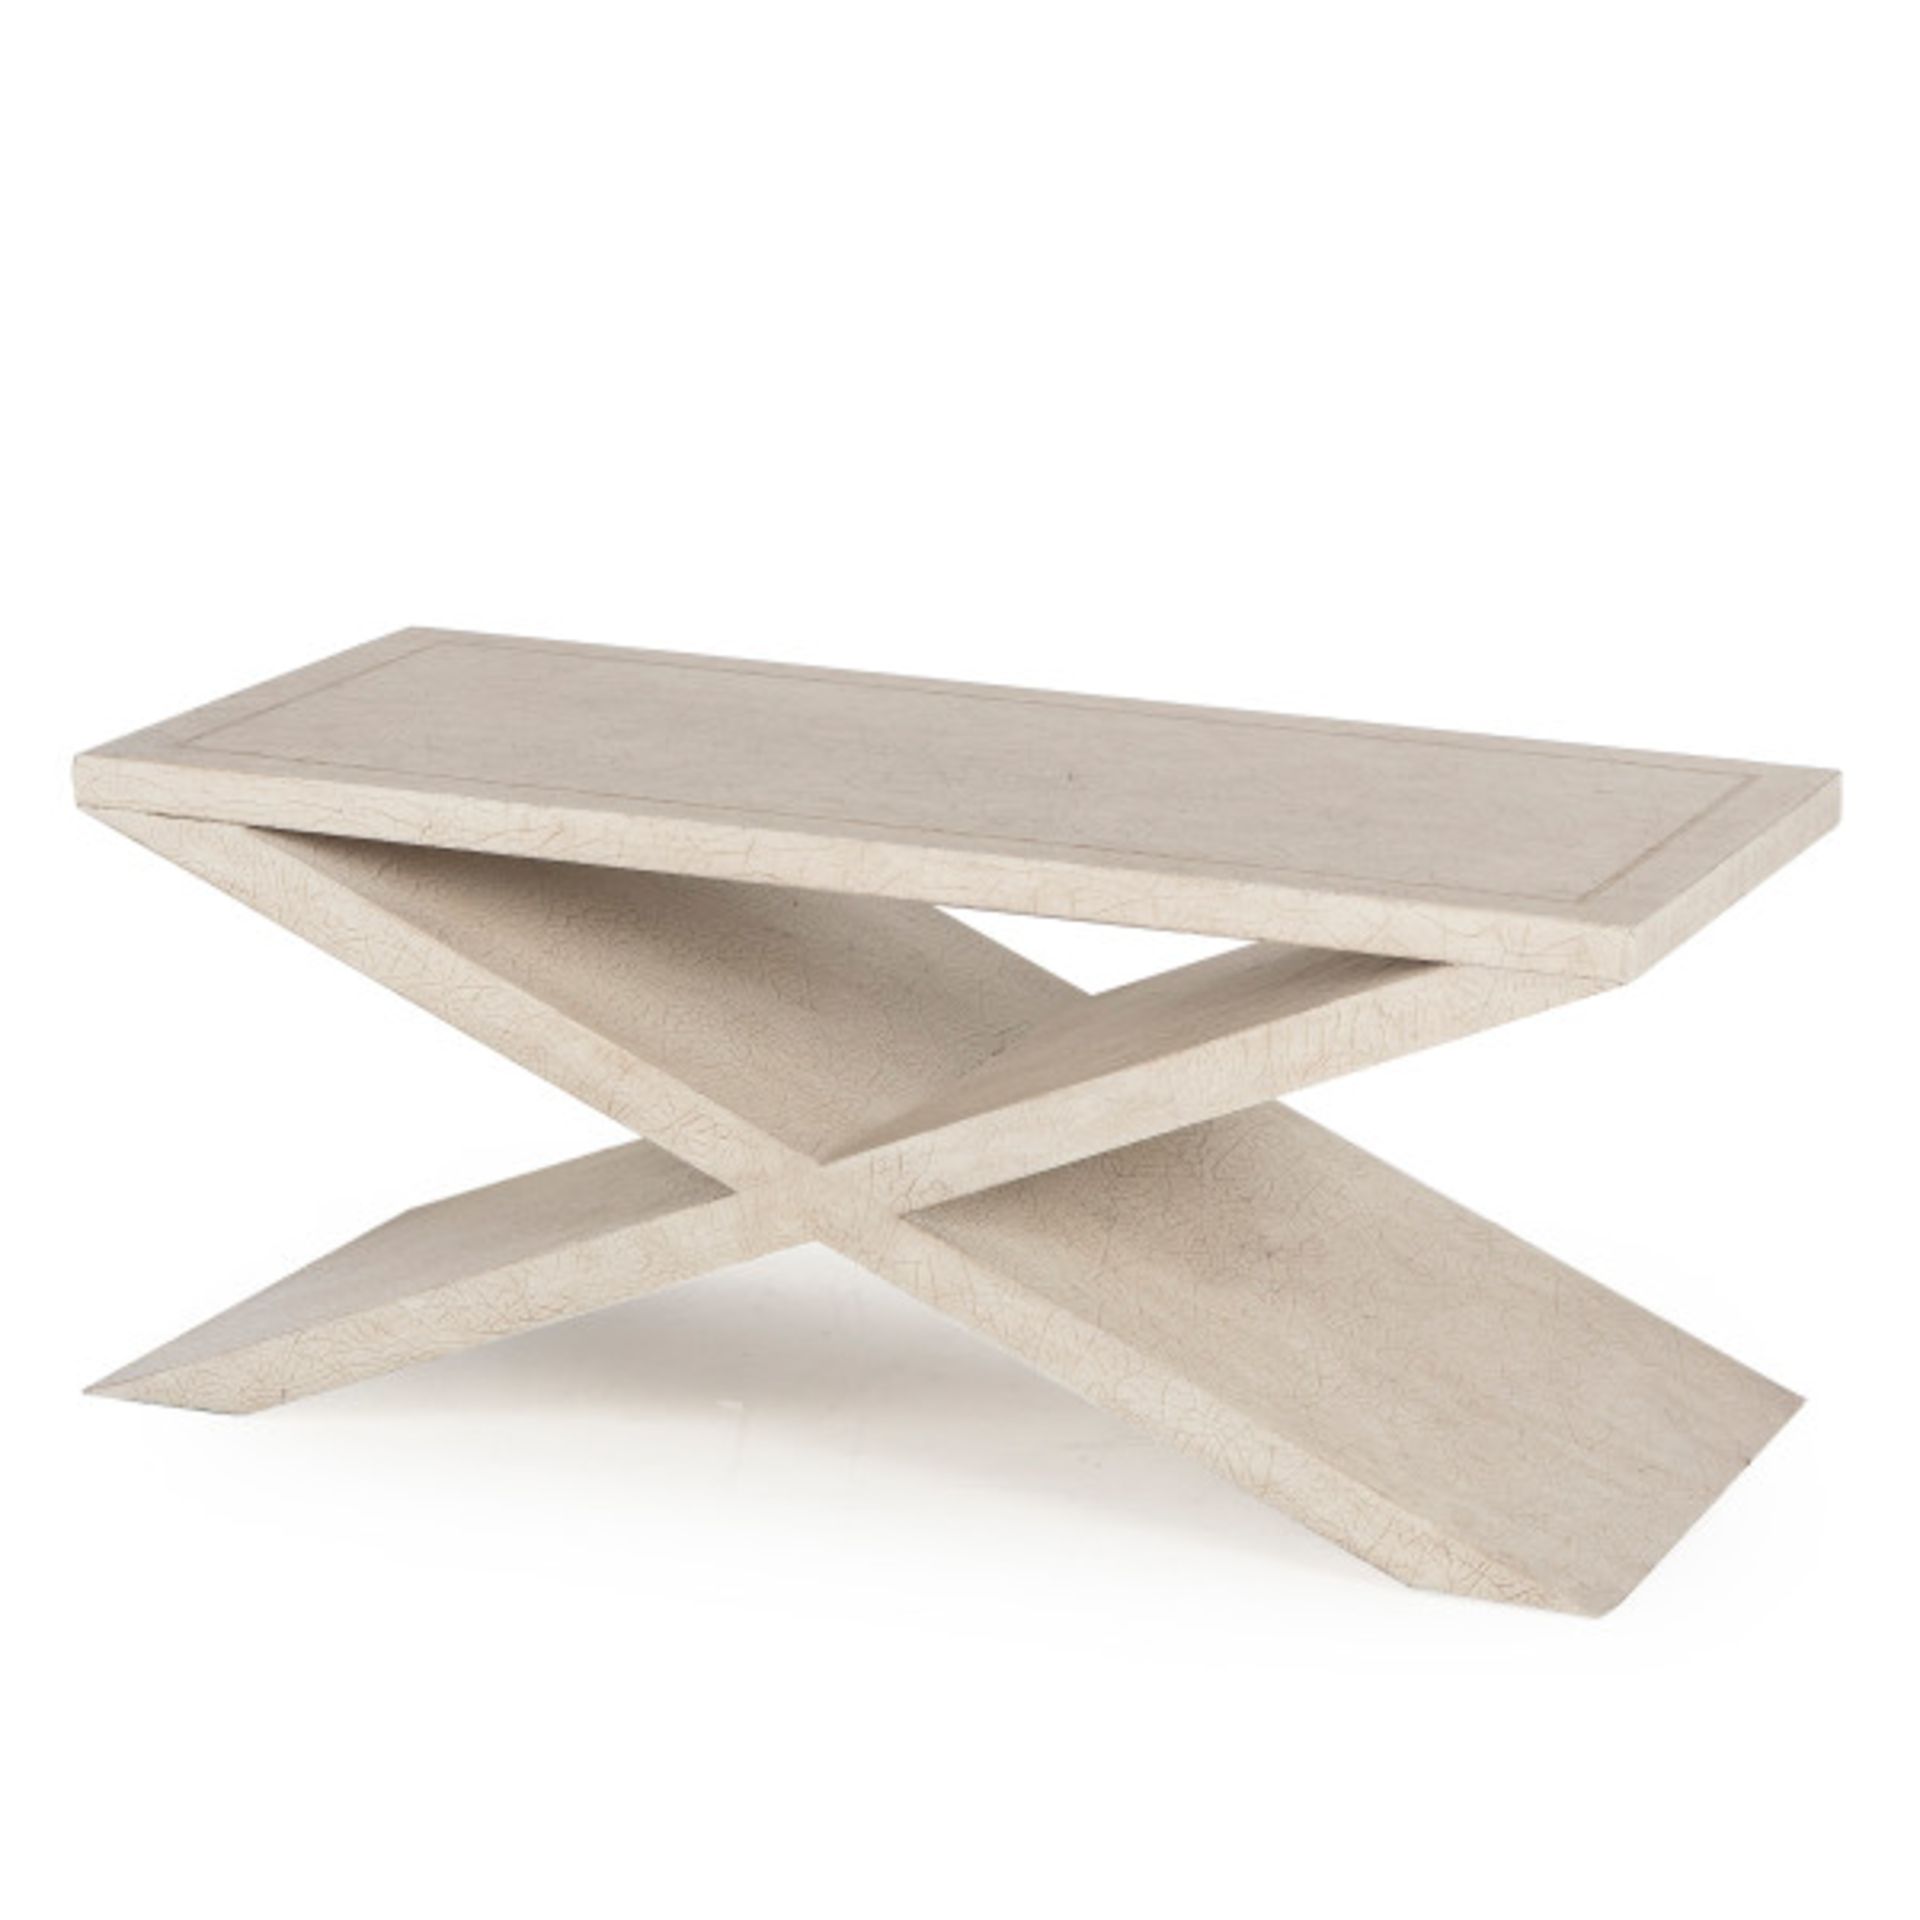 Andrew Martin Vita Coffee Table X-Leg Wood Coffee Table with Antique crackle Finish in Poplar wood